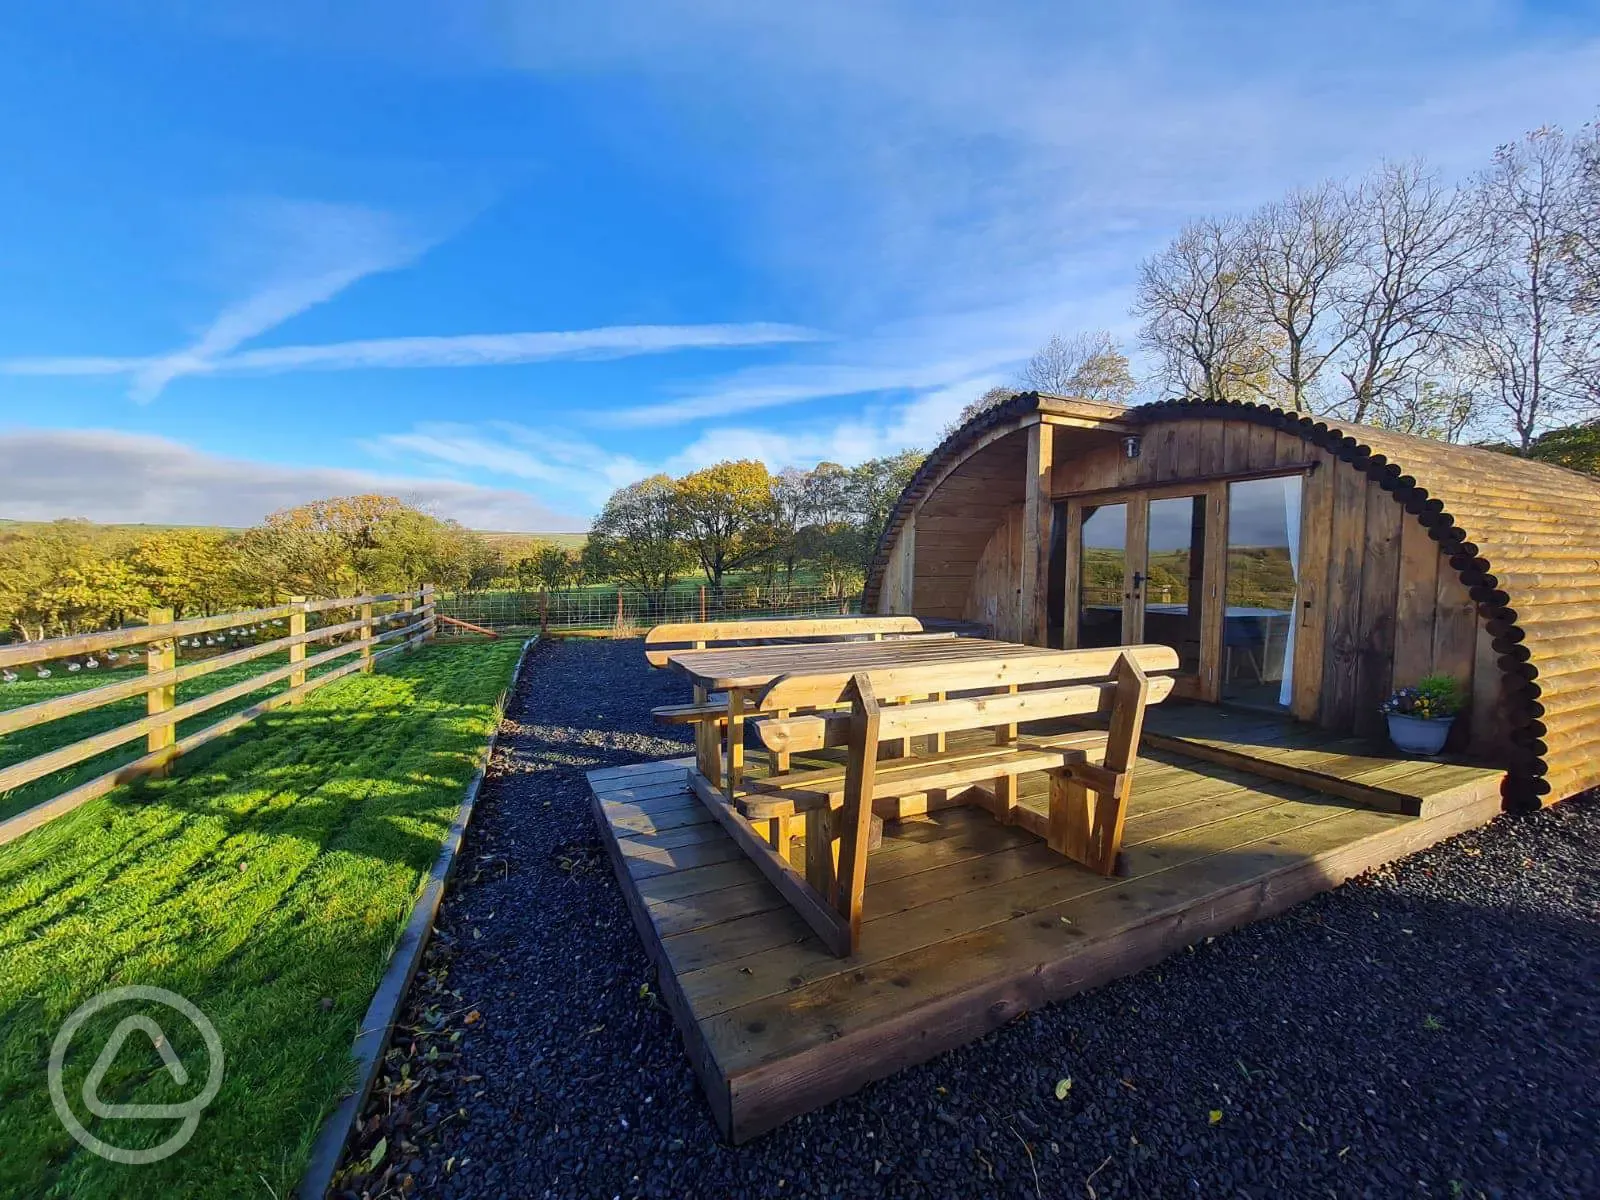 Glamping cabins with hot tubs